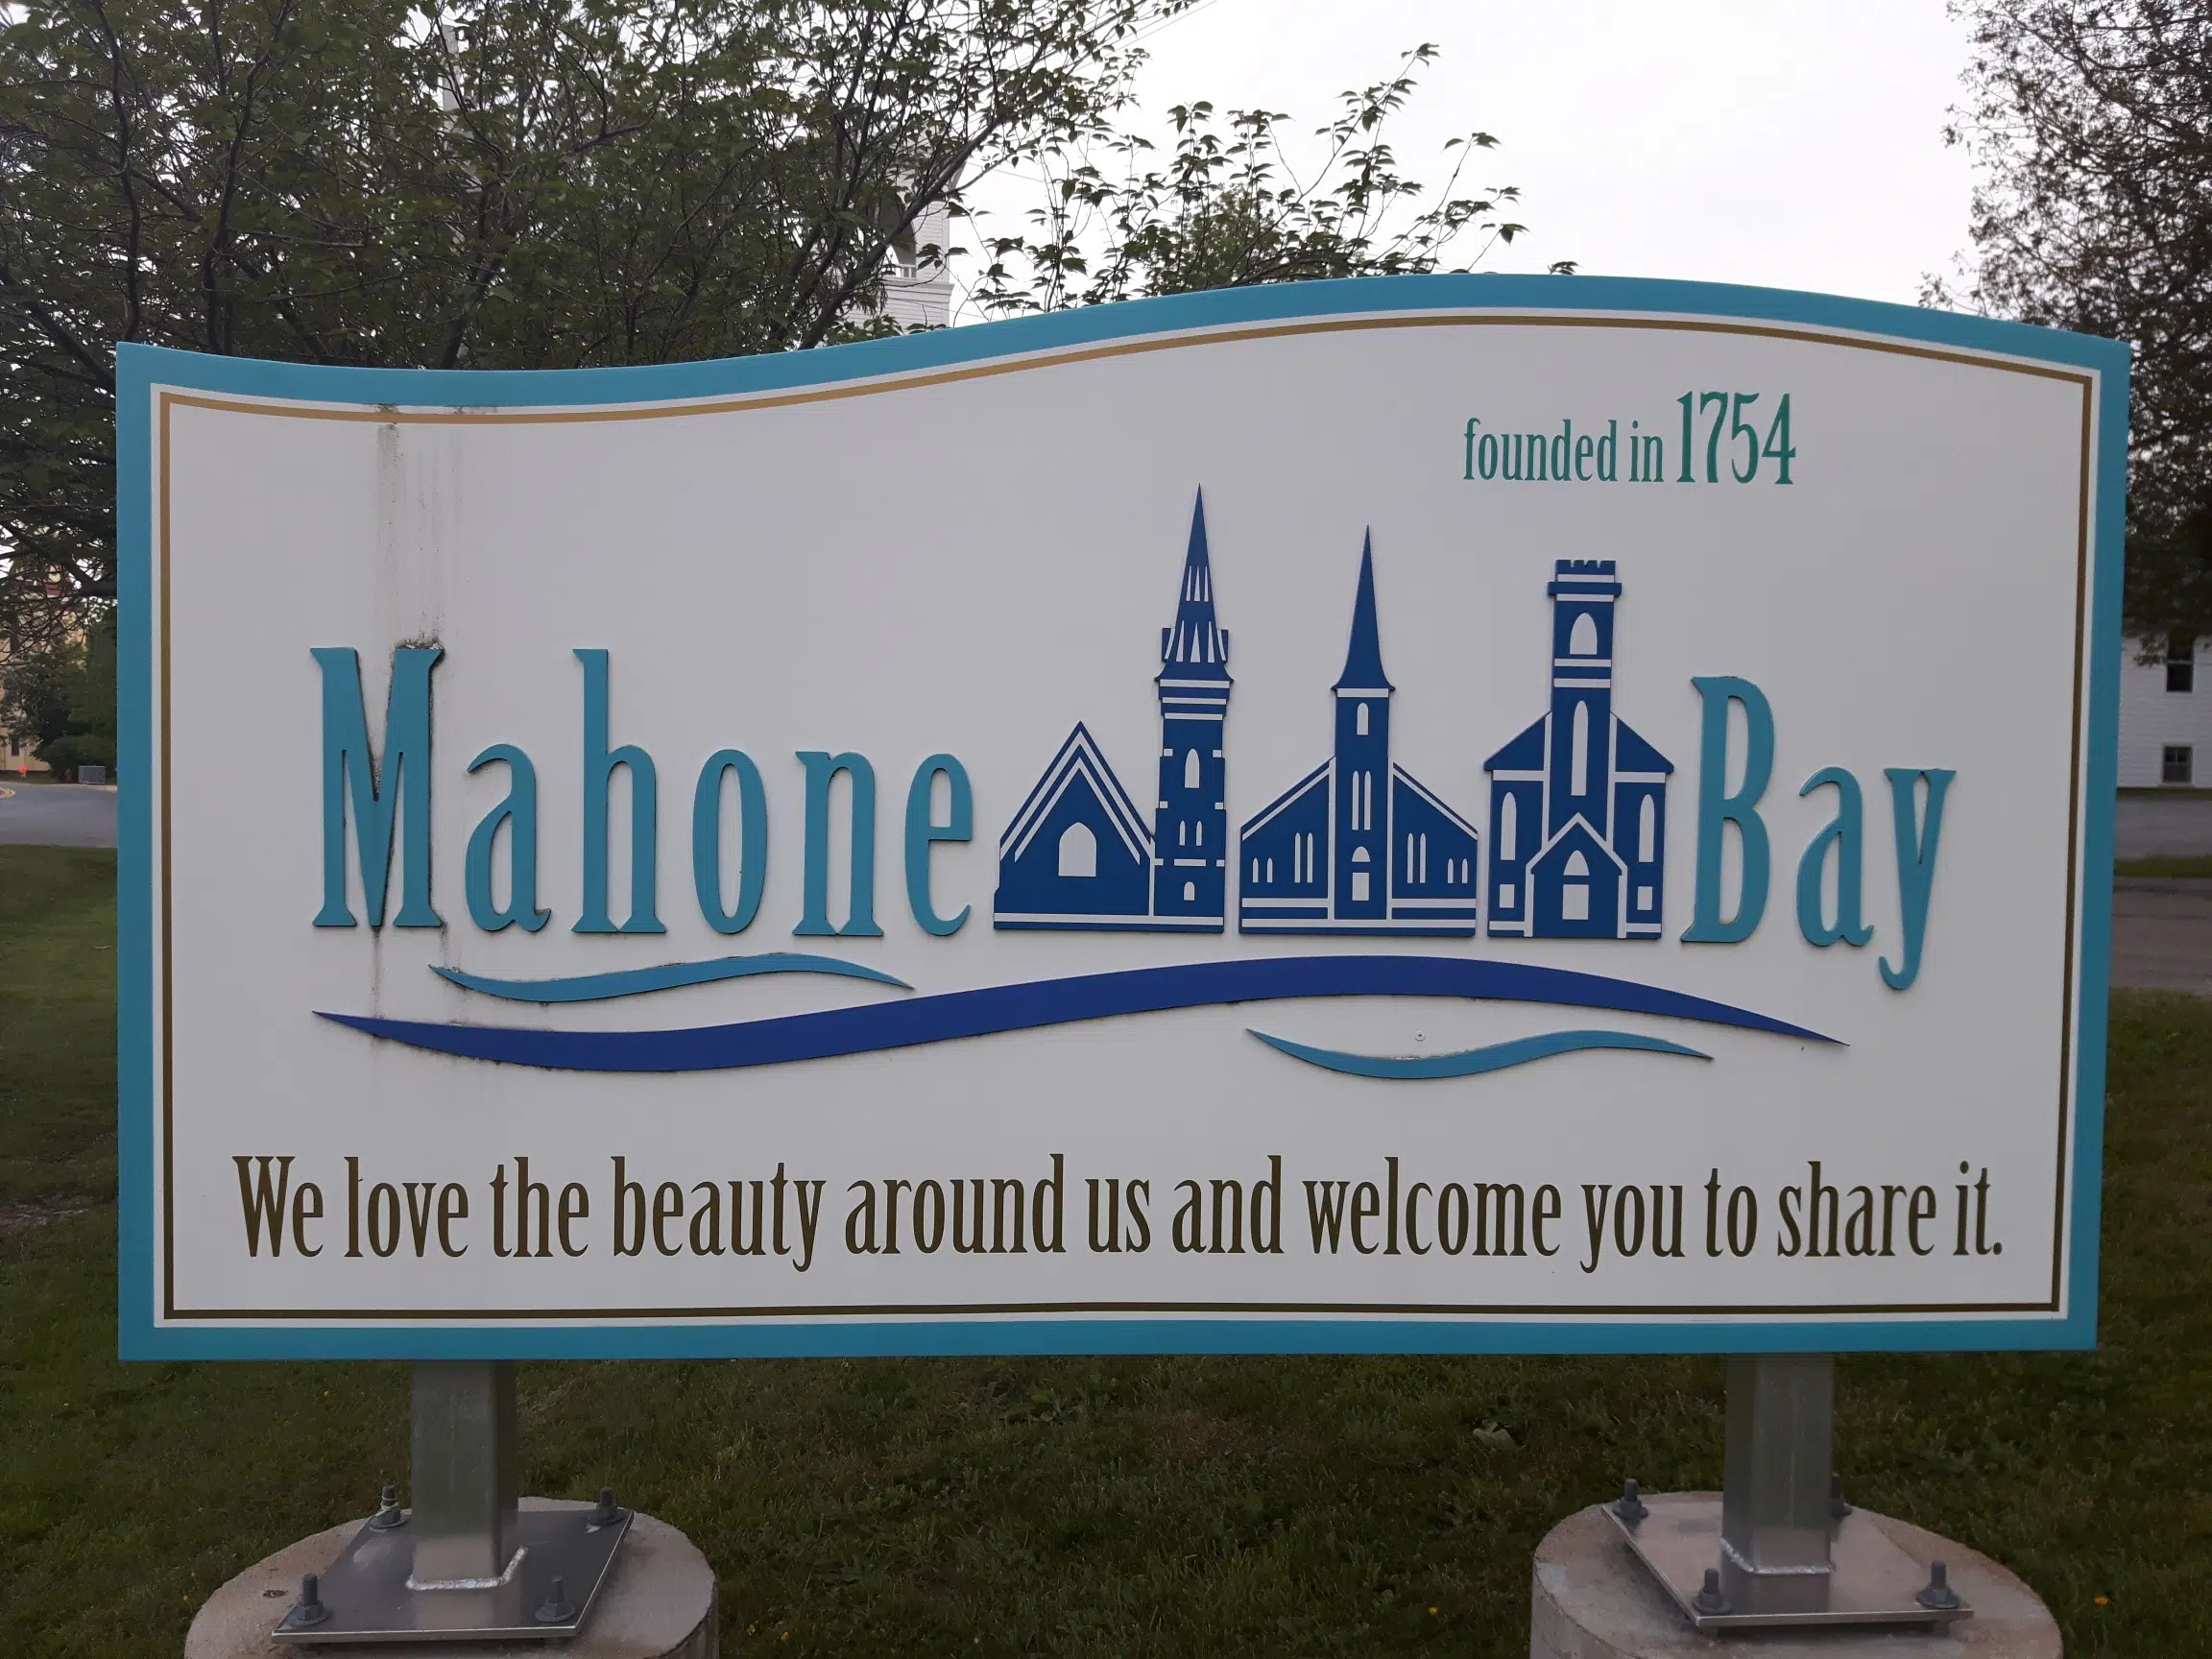 Mahone Bay budget released, commercial rates increasing